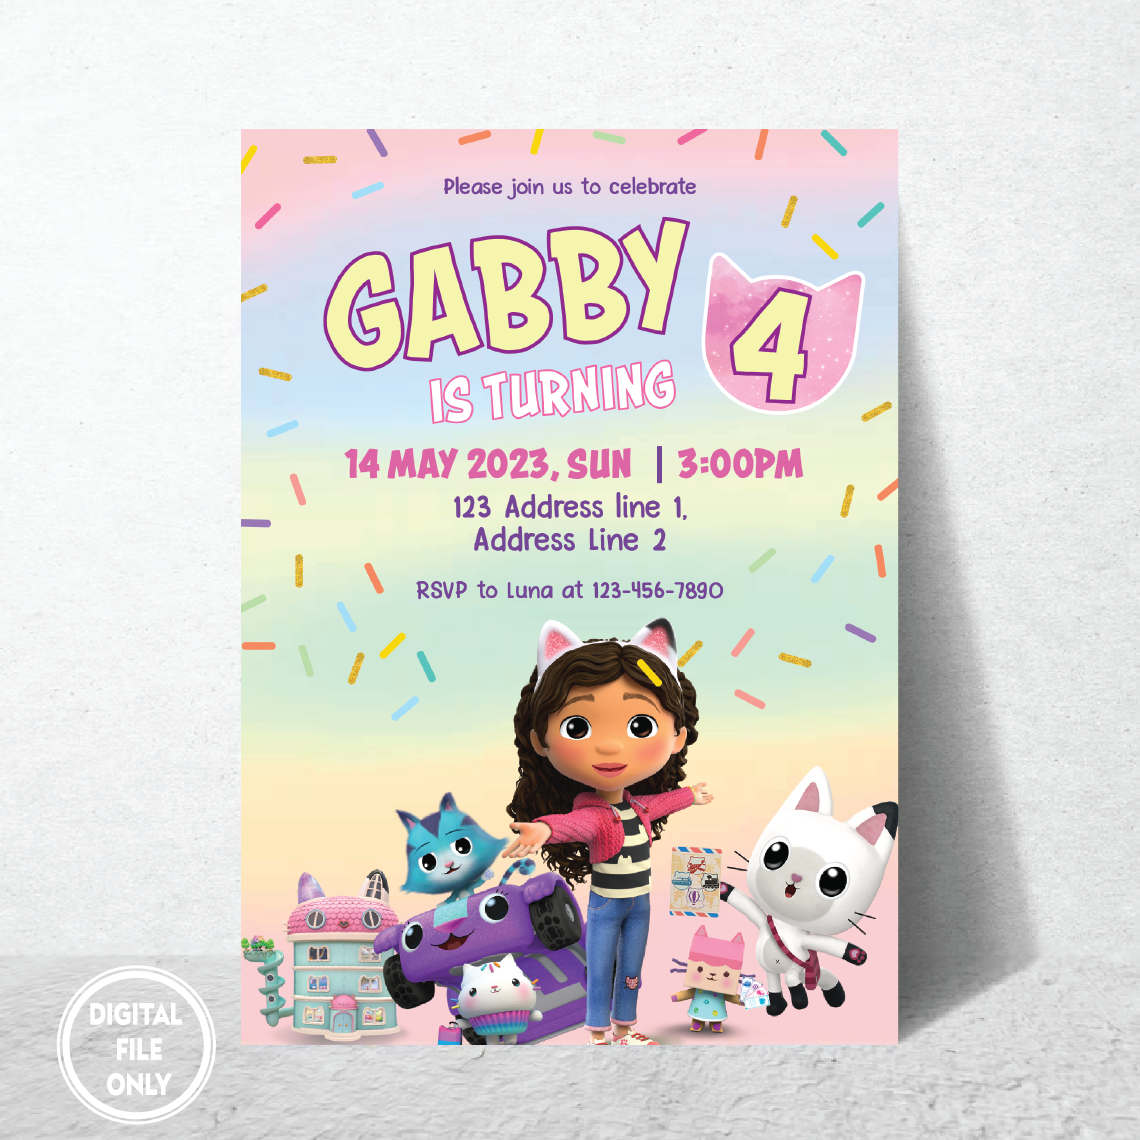 Personalized File Printable Birthday Invitation, Digital Birthday Invitation, Editable Digital Invitation, Kids Birthday Invitation PNG File Only